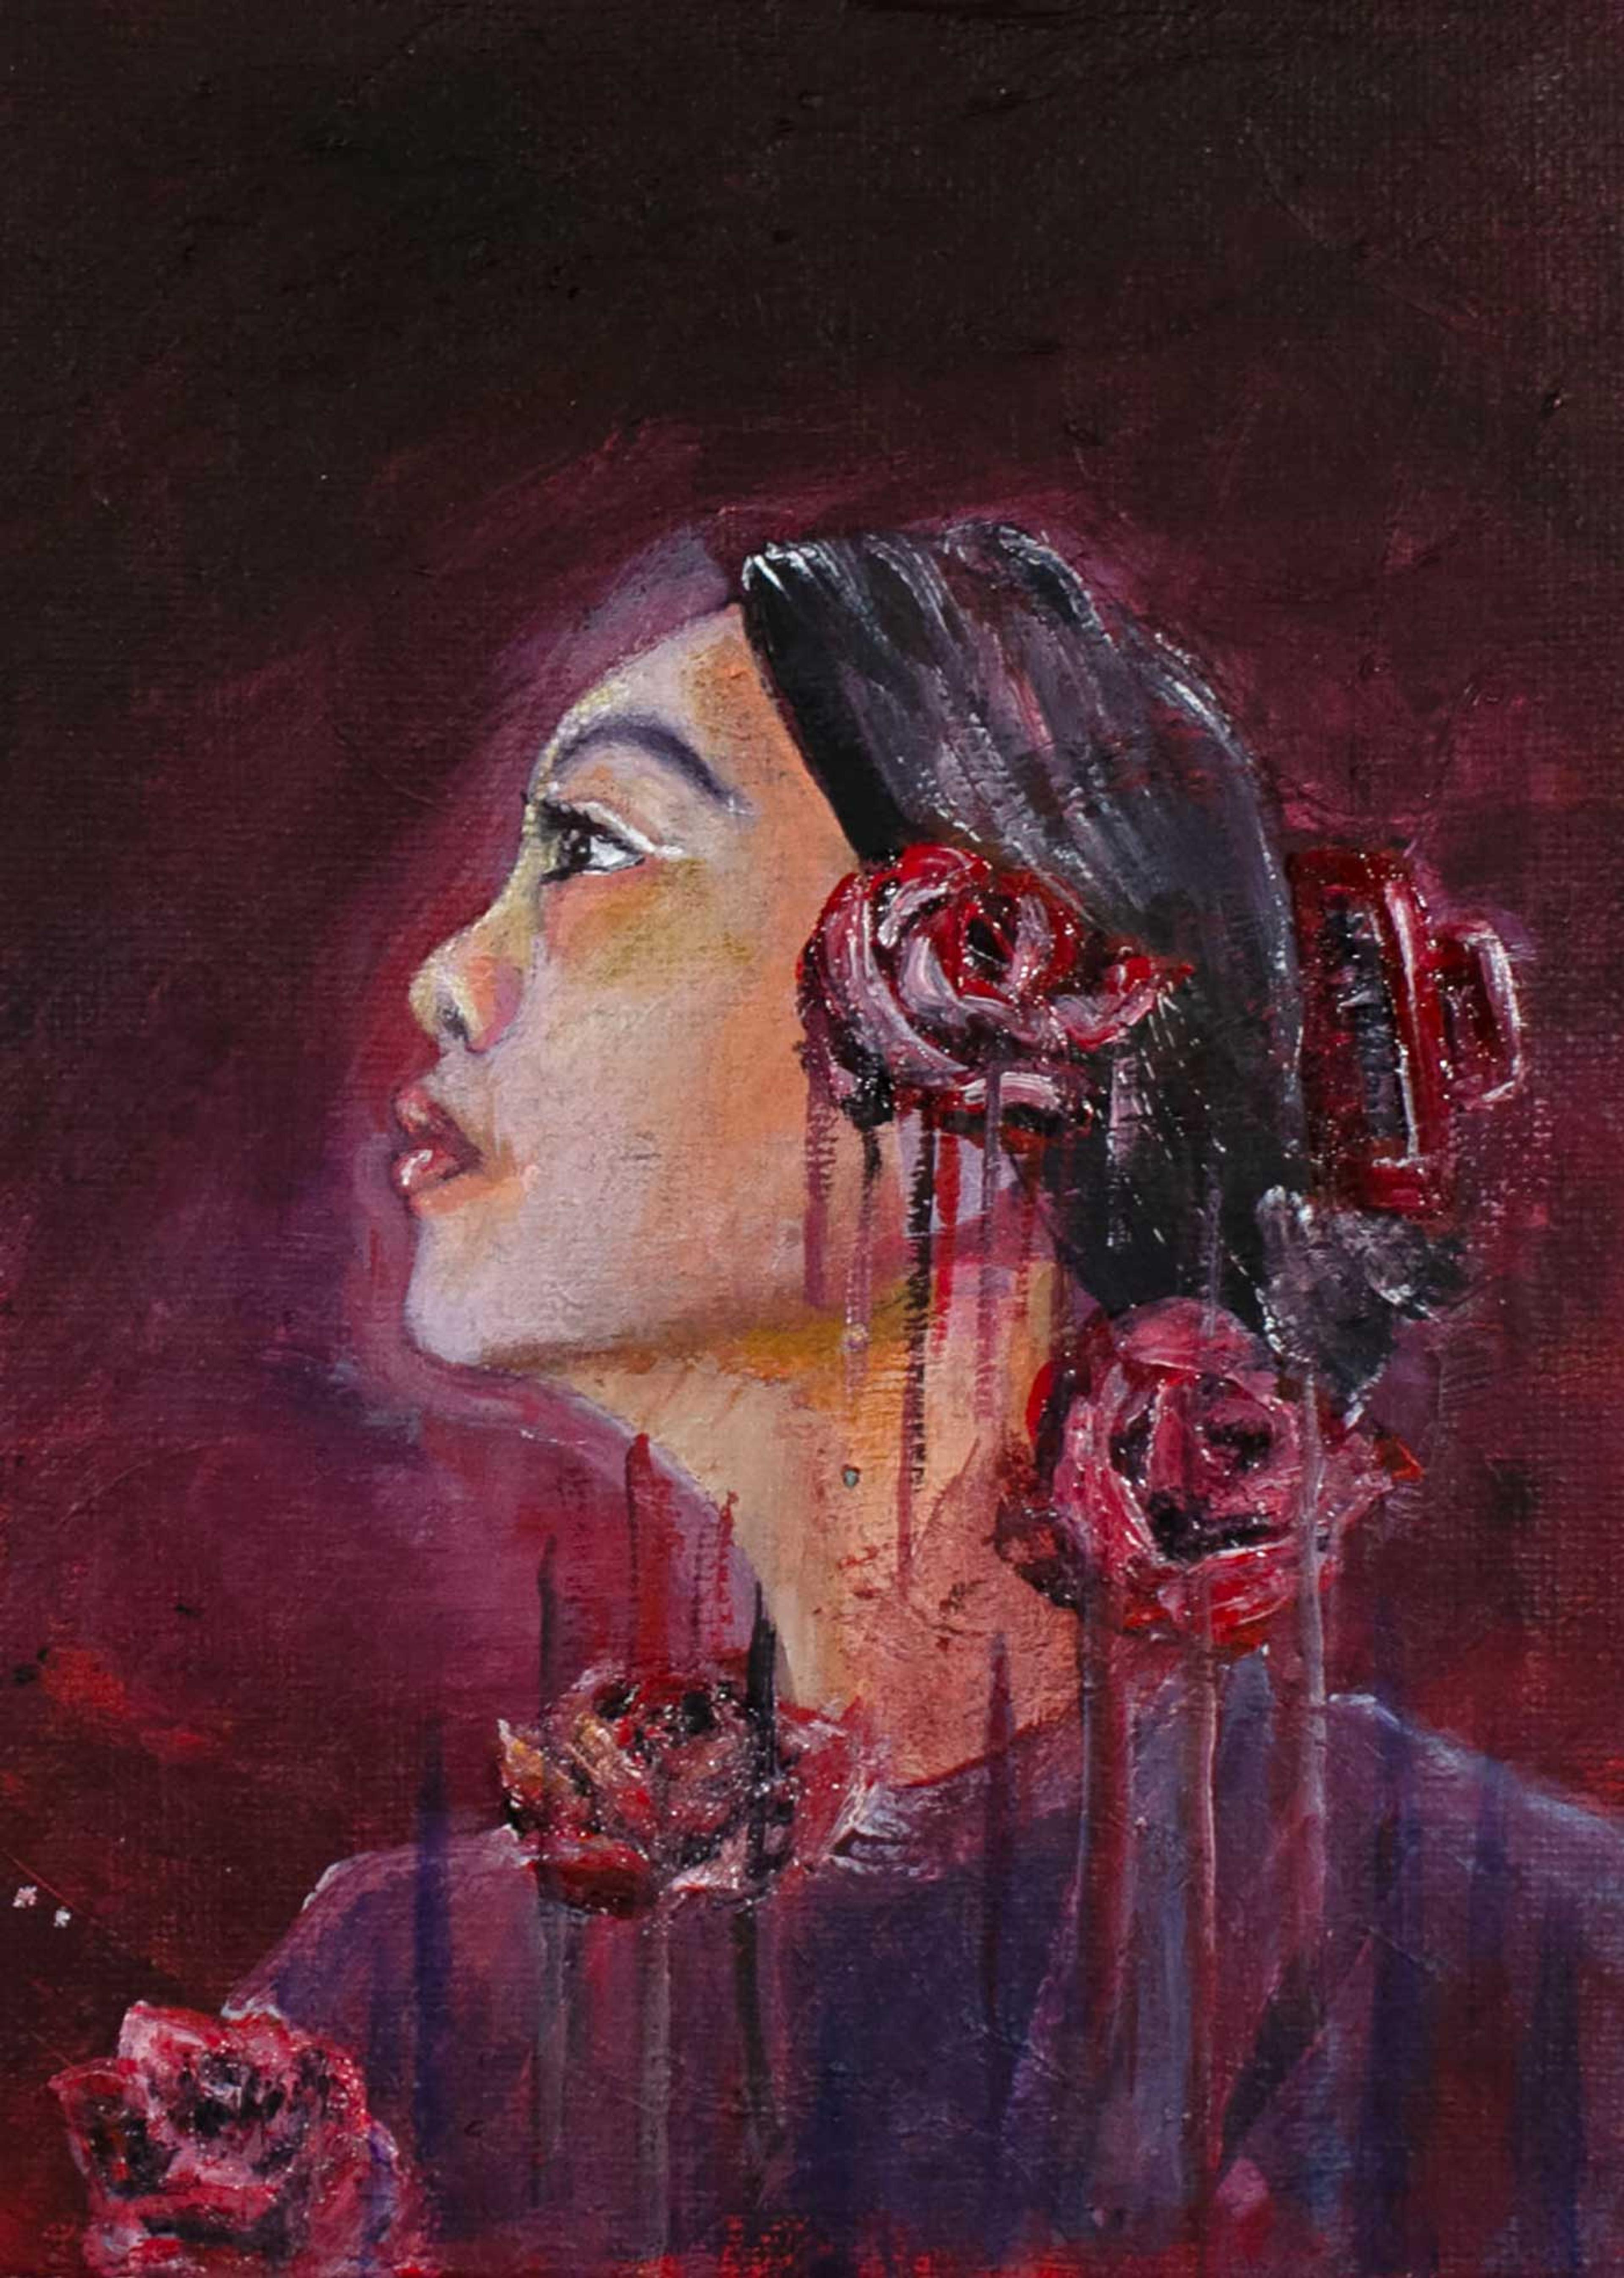 Acrylic-on-canvas self-portrait of an adolescent girl facing slightly upward to the left in profile. She has dark hair tied behind her head, wears a dark blue shirt, and has several red roses adorning her hair and chest, each of which appears to be melting with bold, dark red vertical paint strokes. The background is a dark burgundy.